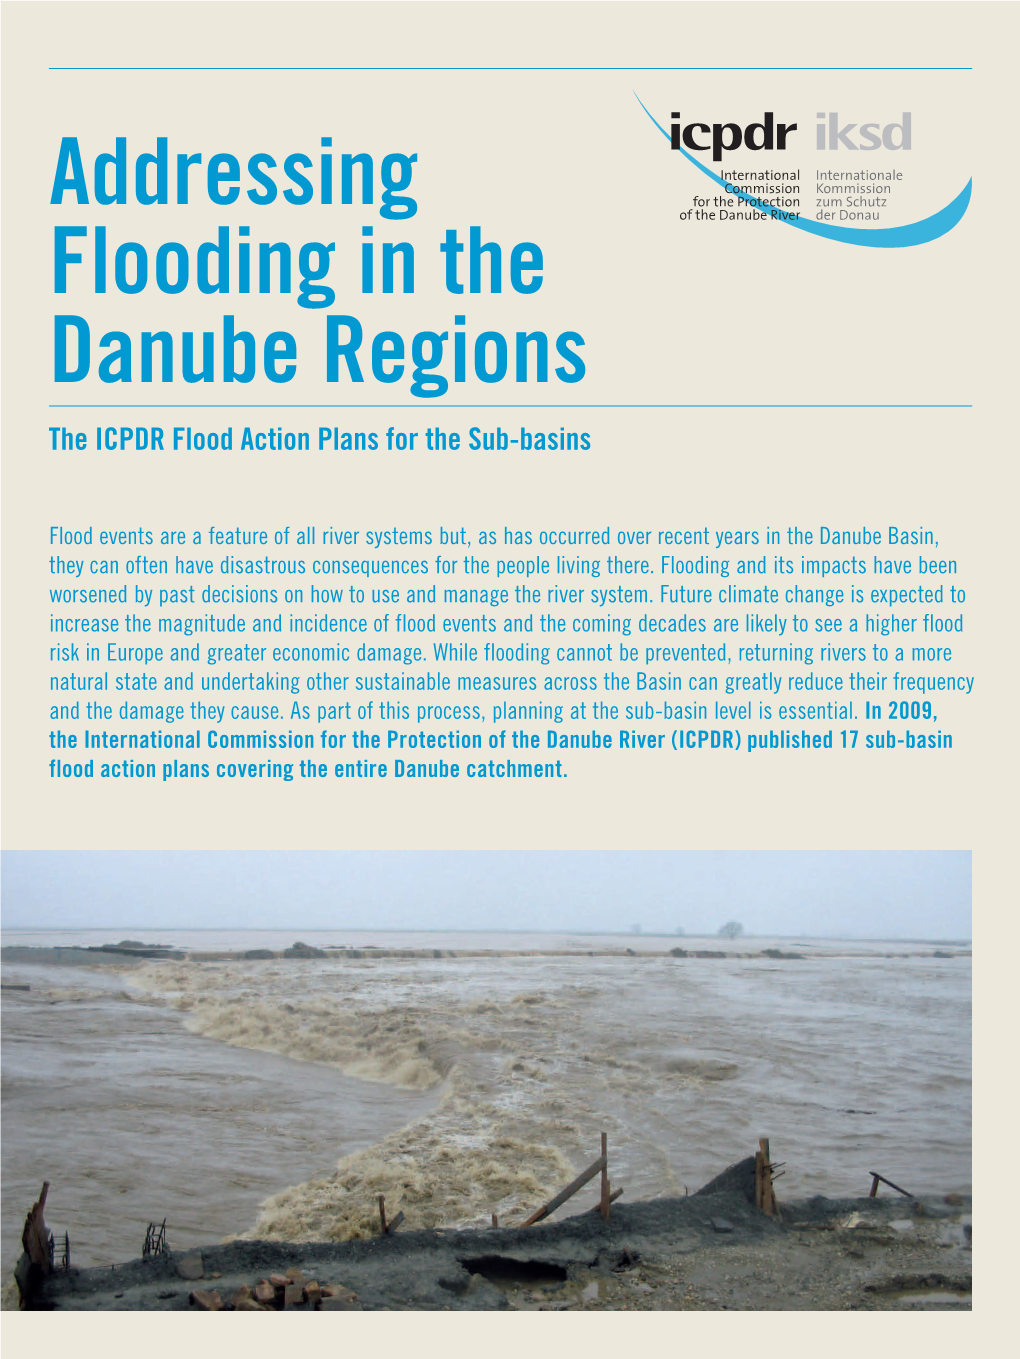 Addressing Flooding in the Danube Regions the ICPDR Flood Action Plans for the Sub-Basins